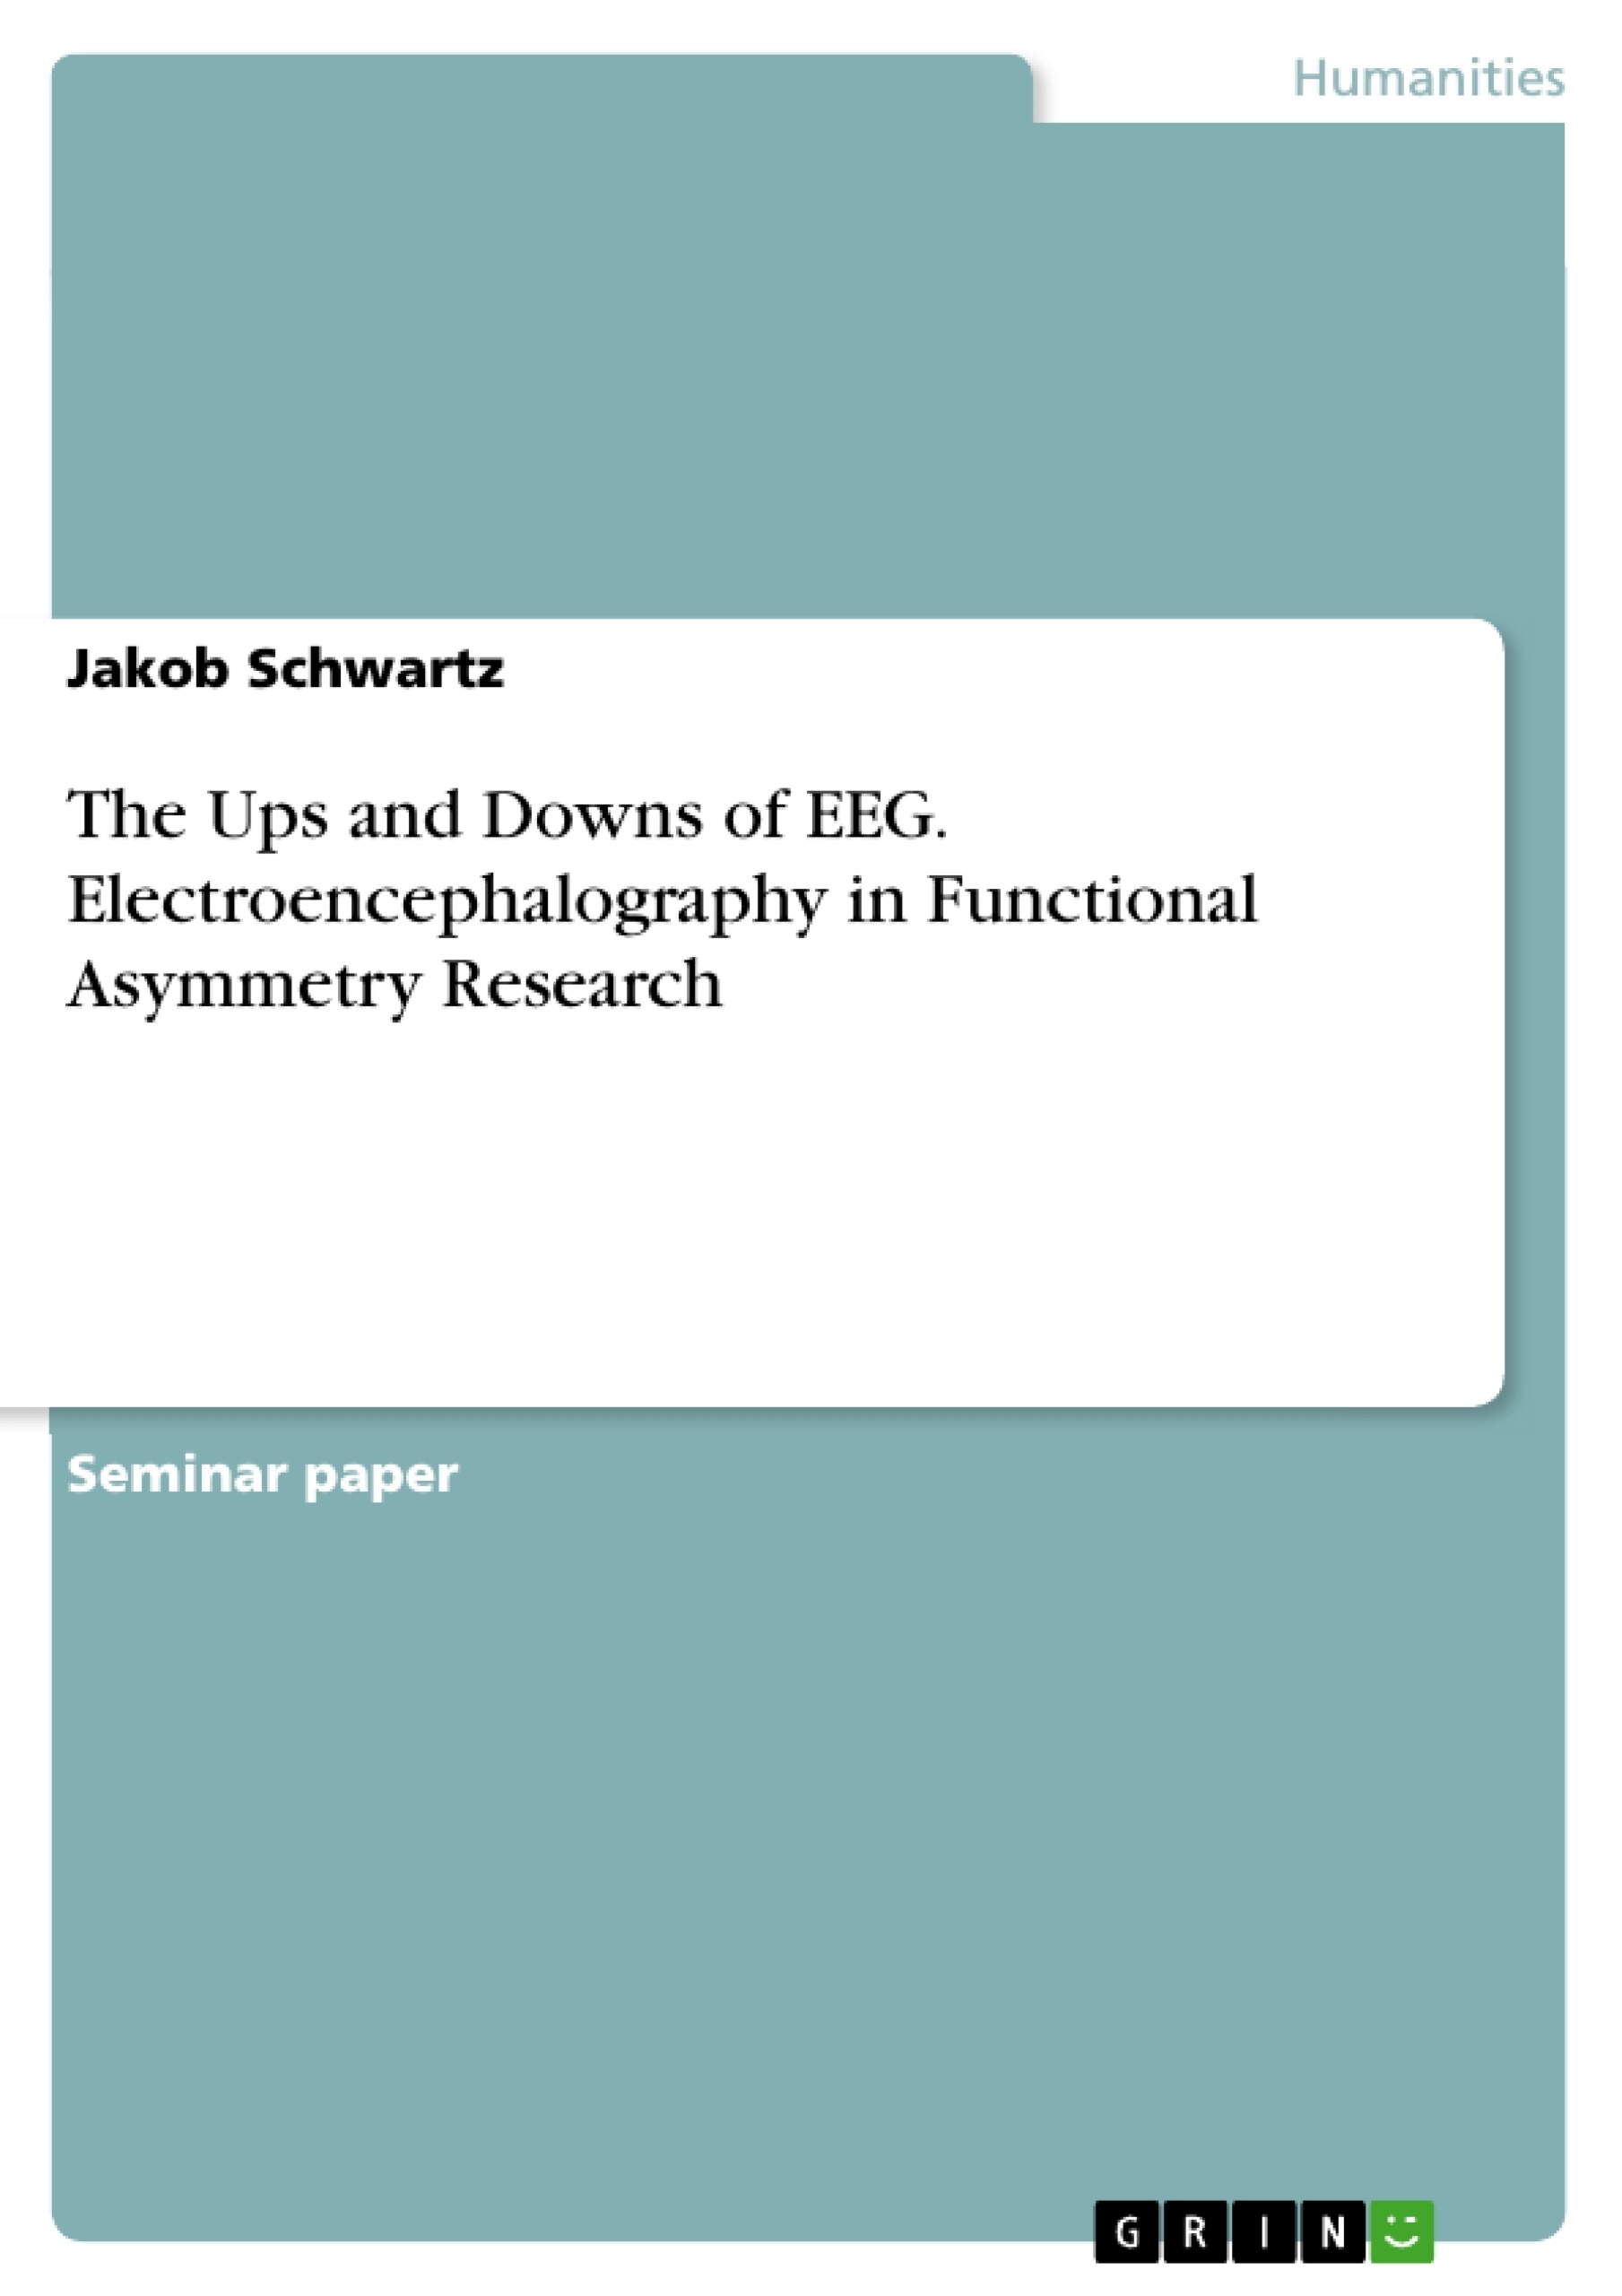 Titre: The Ups and Downs of EEG. Electroencephalography in Functional Asymmetry Research